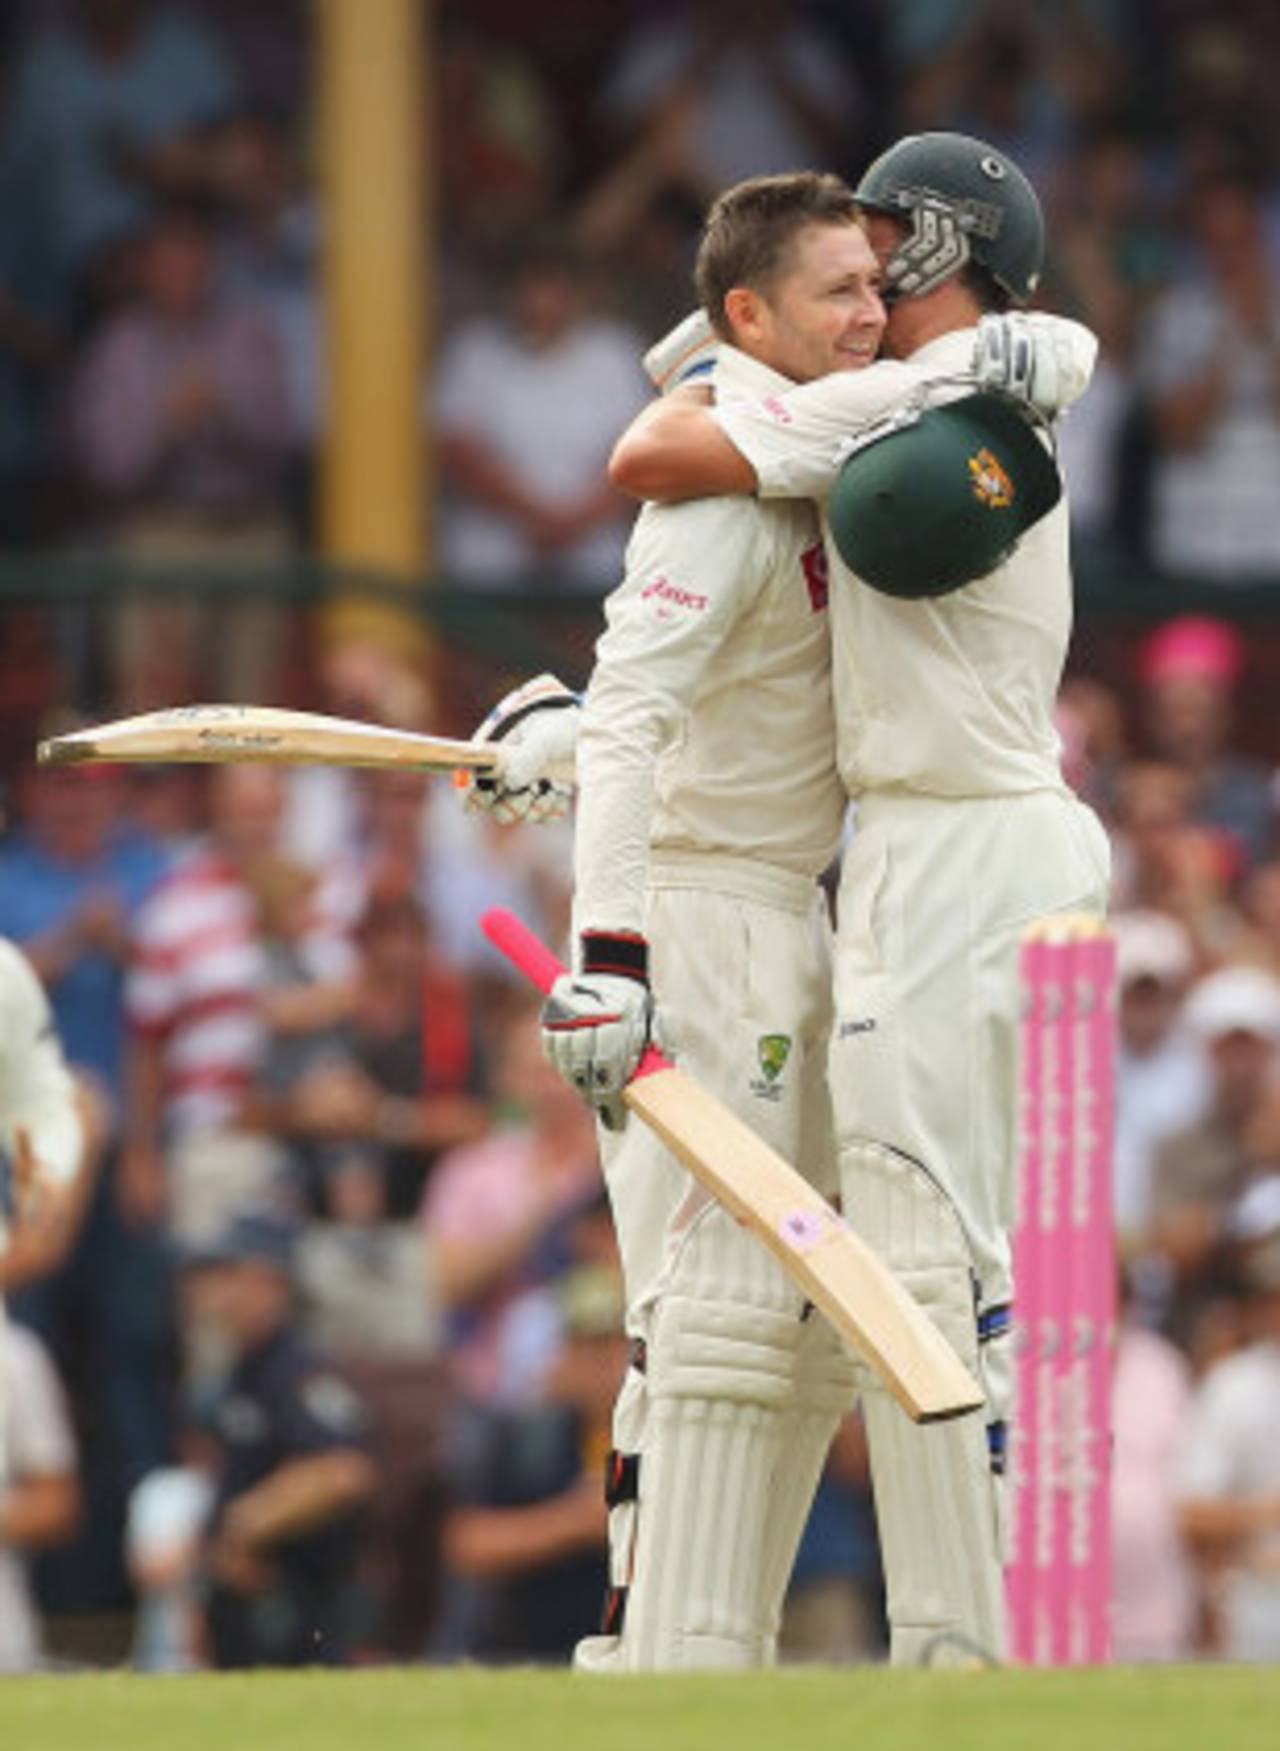 Michael Clarke gets a hug from Michael Hussey after completing his double-ton, Australia v India, 2nd Test, Sydney, 2nd day, January 4, 2012